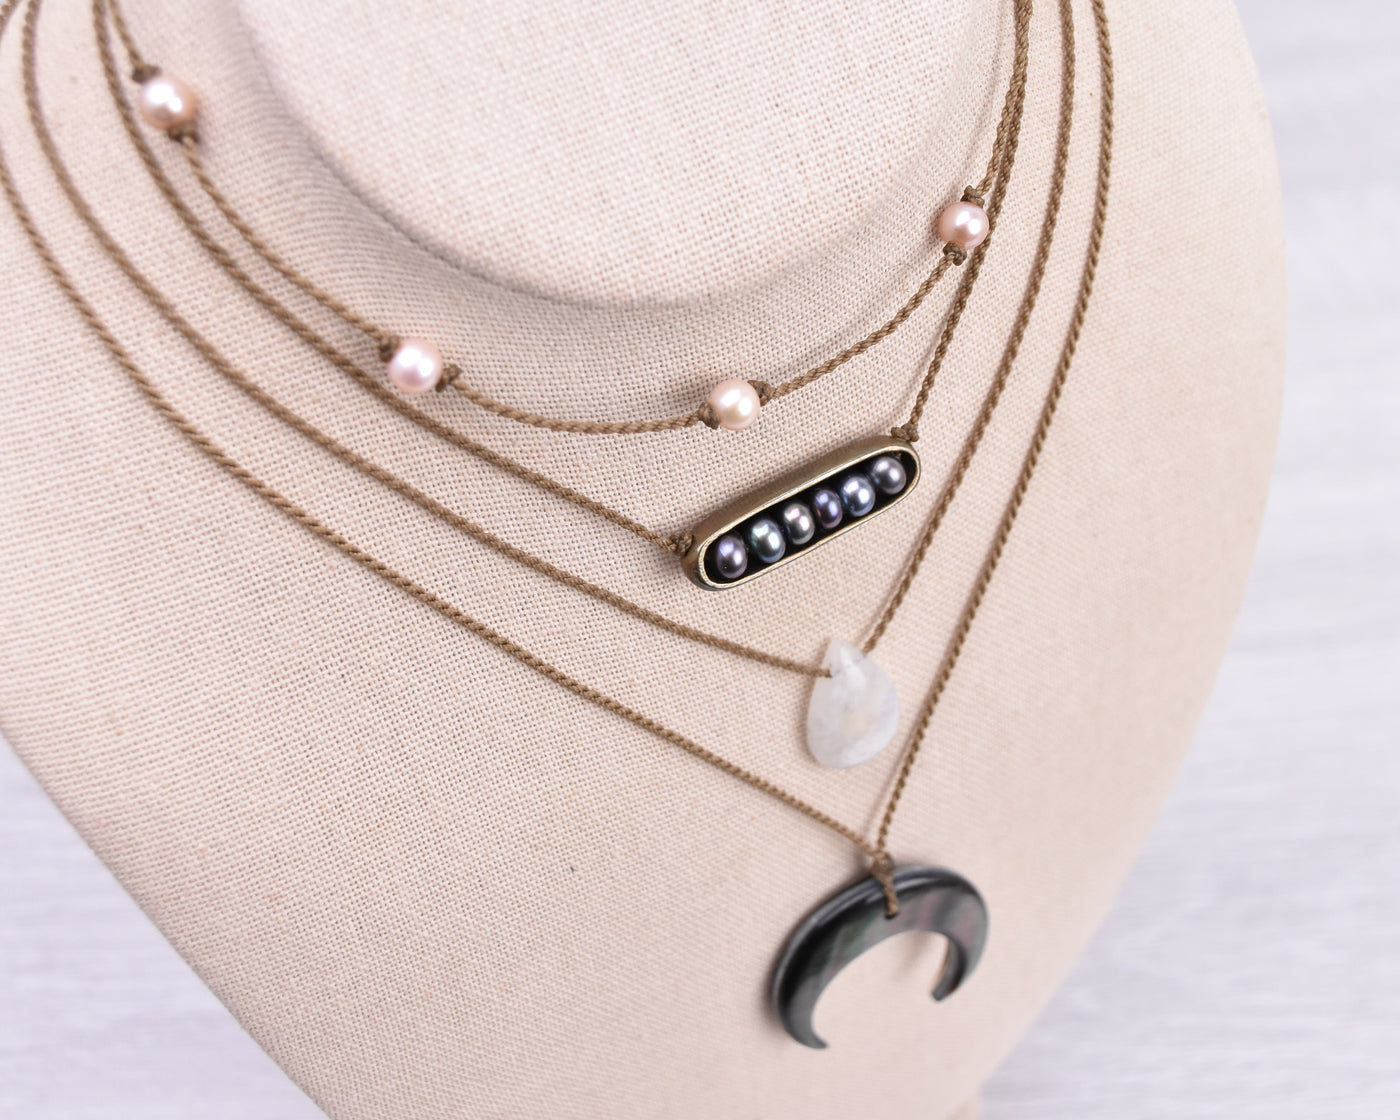 Moon Dust - Necklace Stack (15% off)